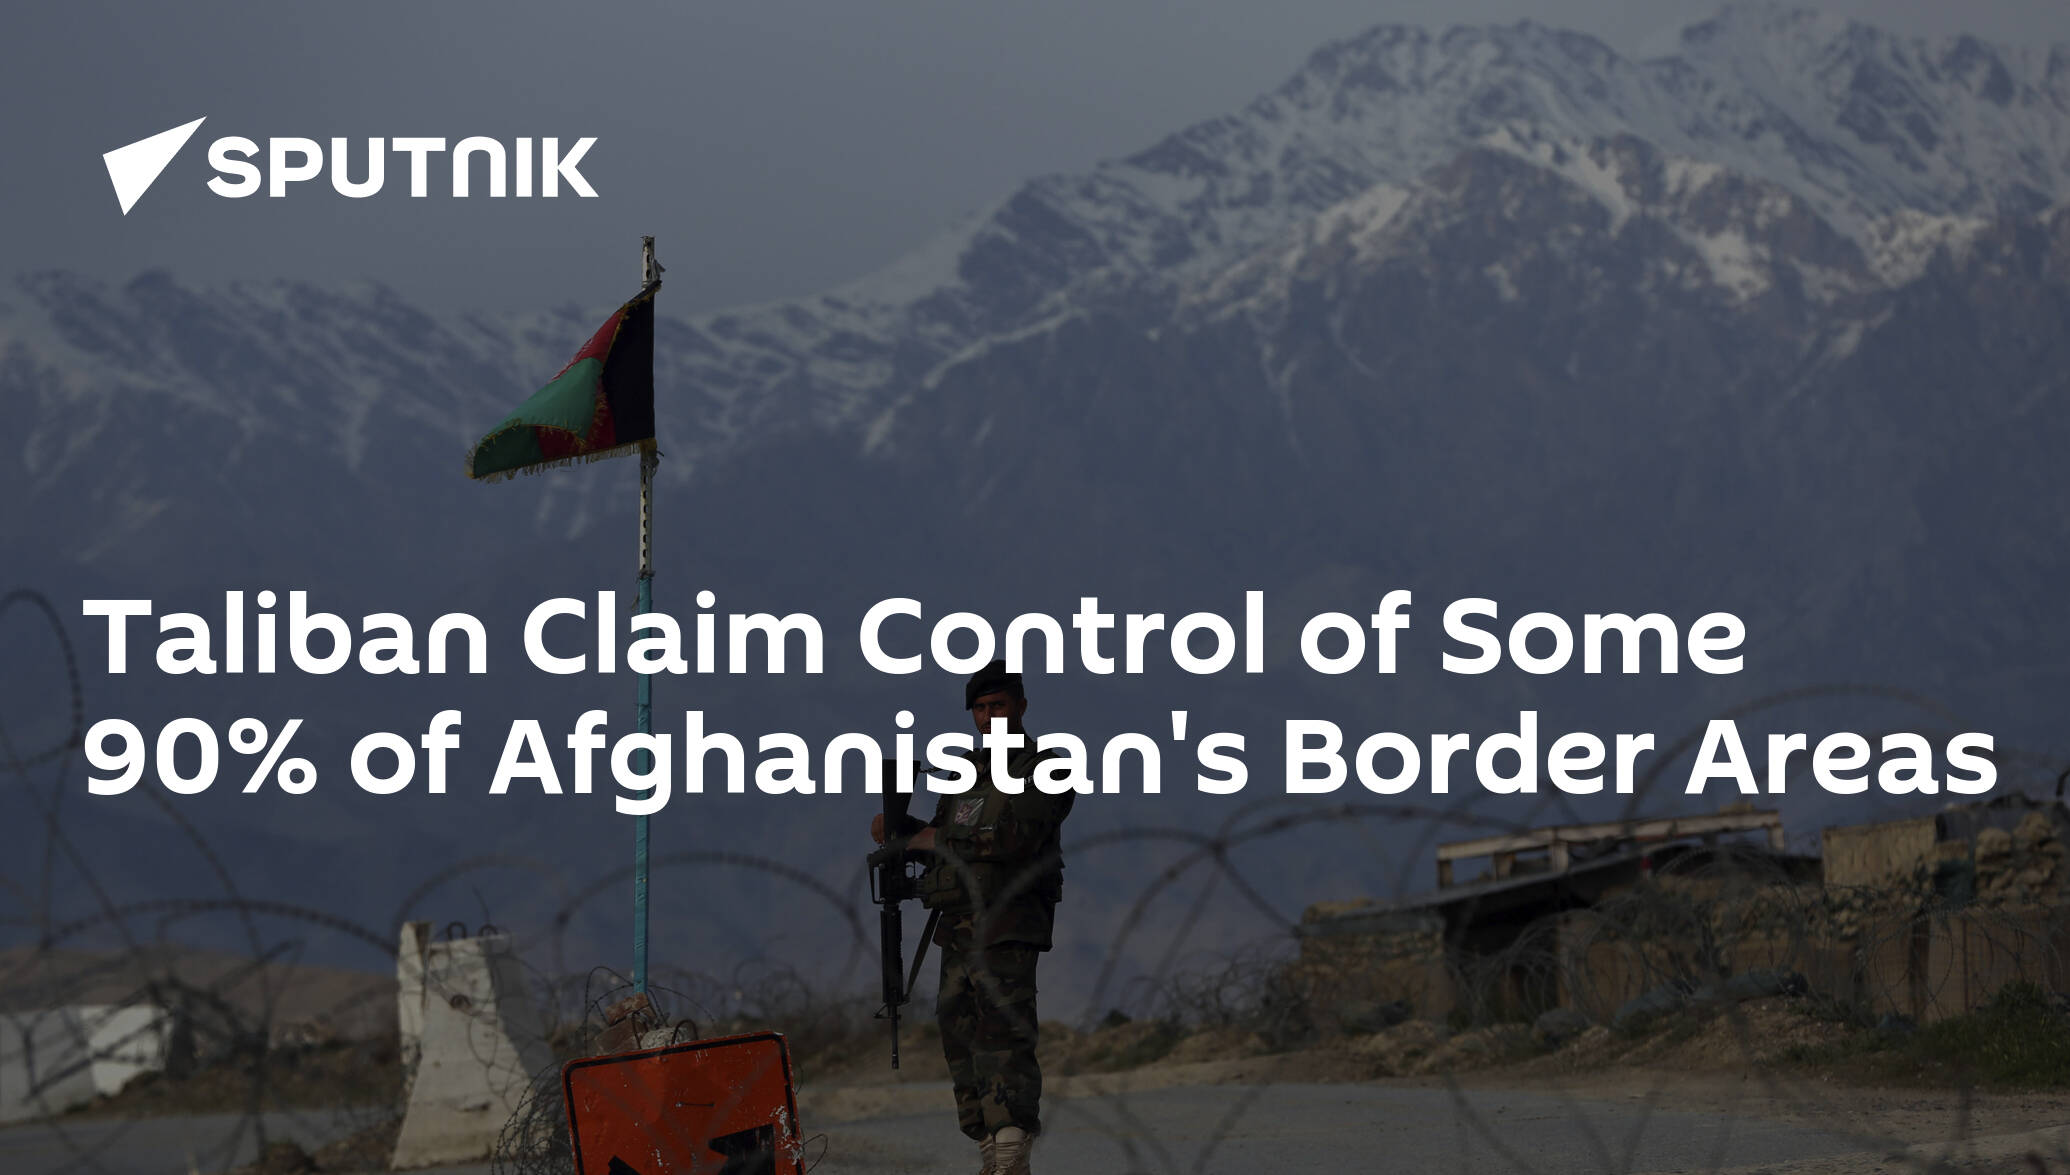 Taliban Claim Control of Some 90% of Afghanistan's Border Areas